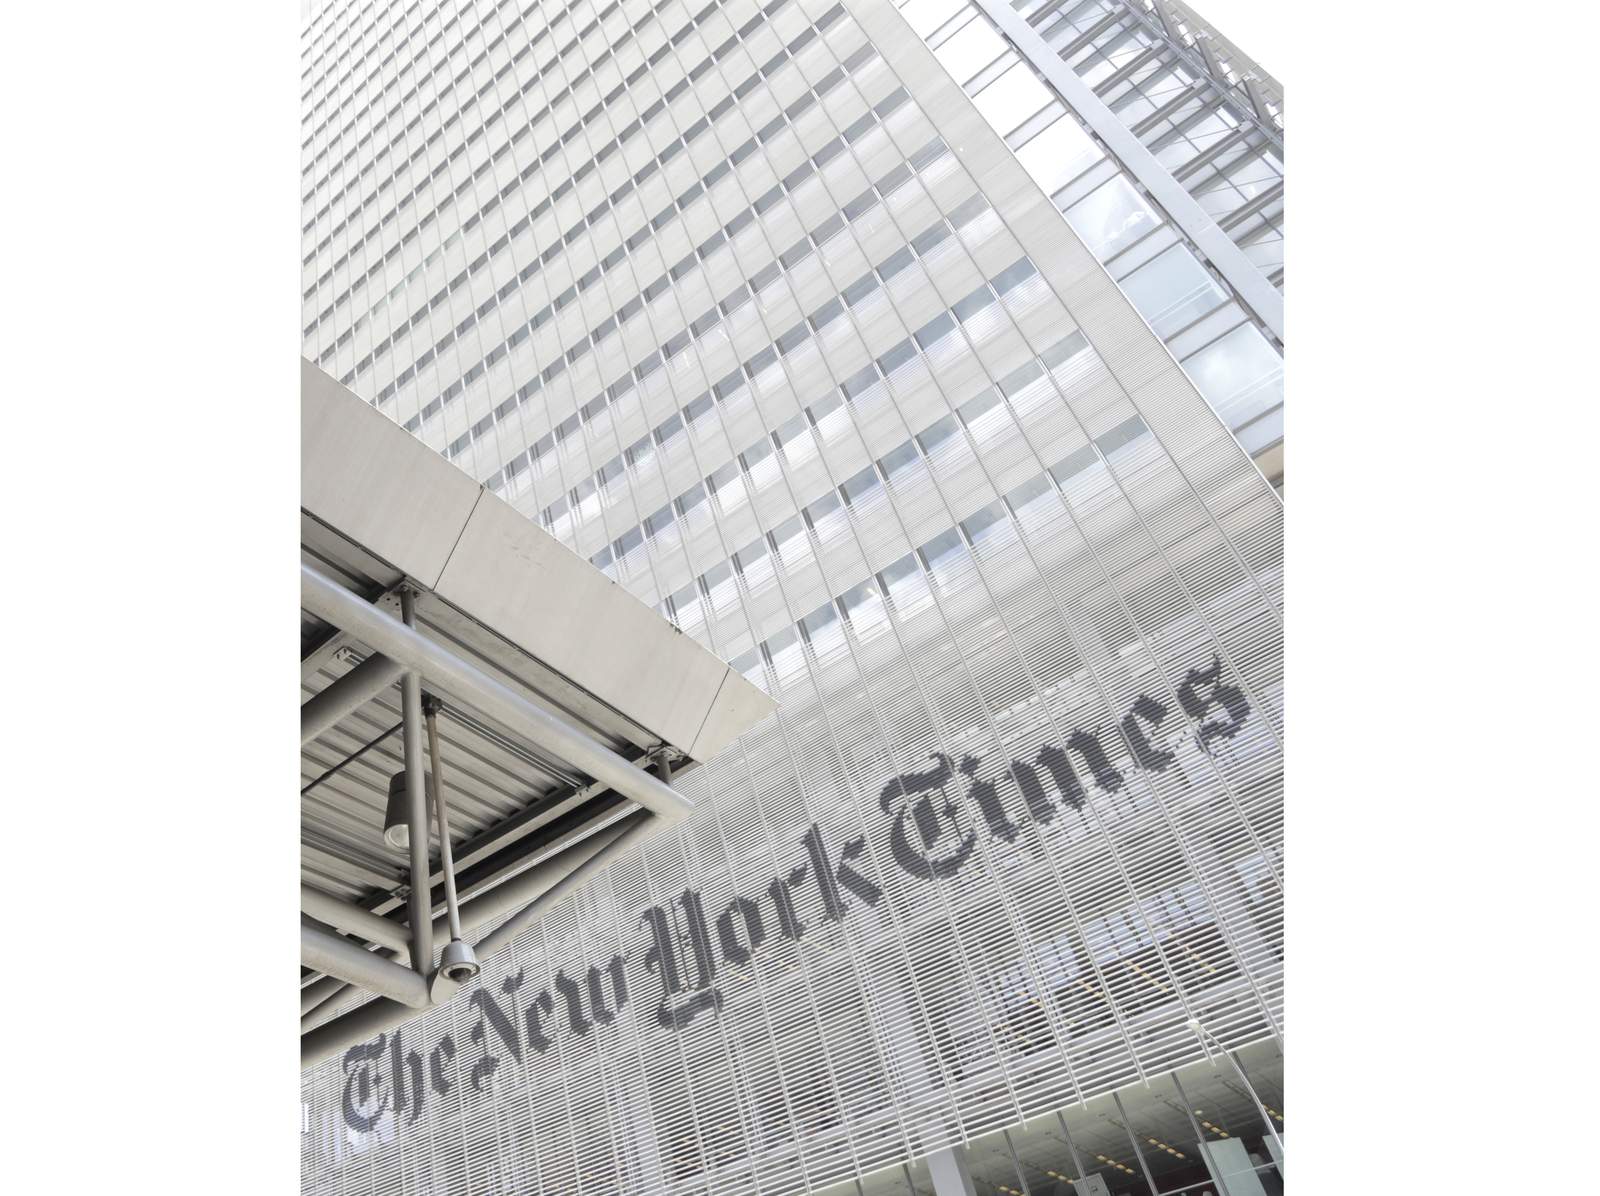 NY Times says it needs culture change, better inclusion